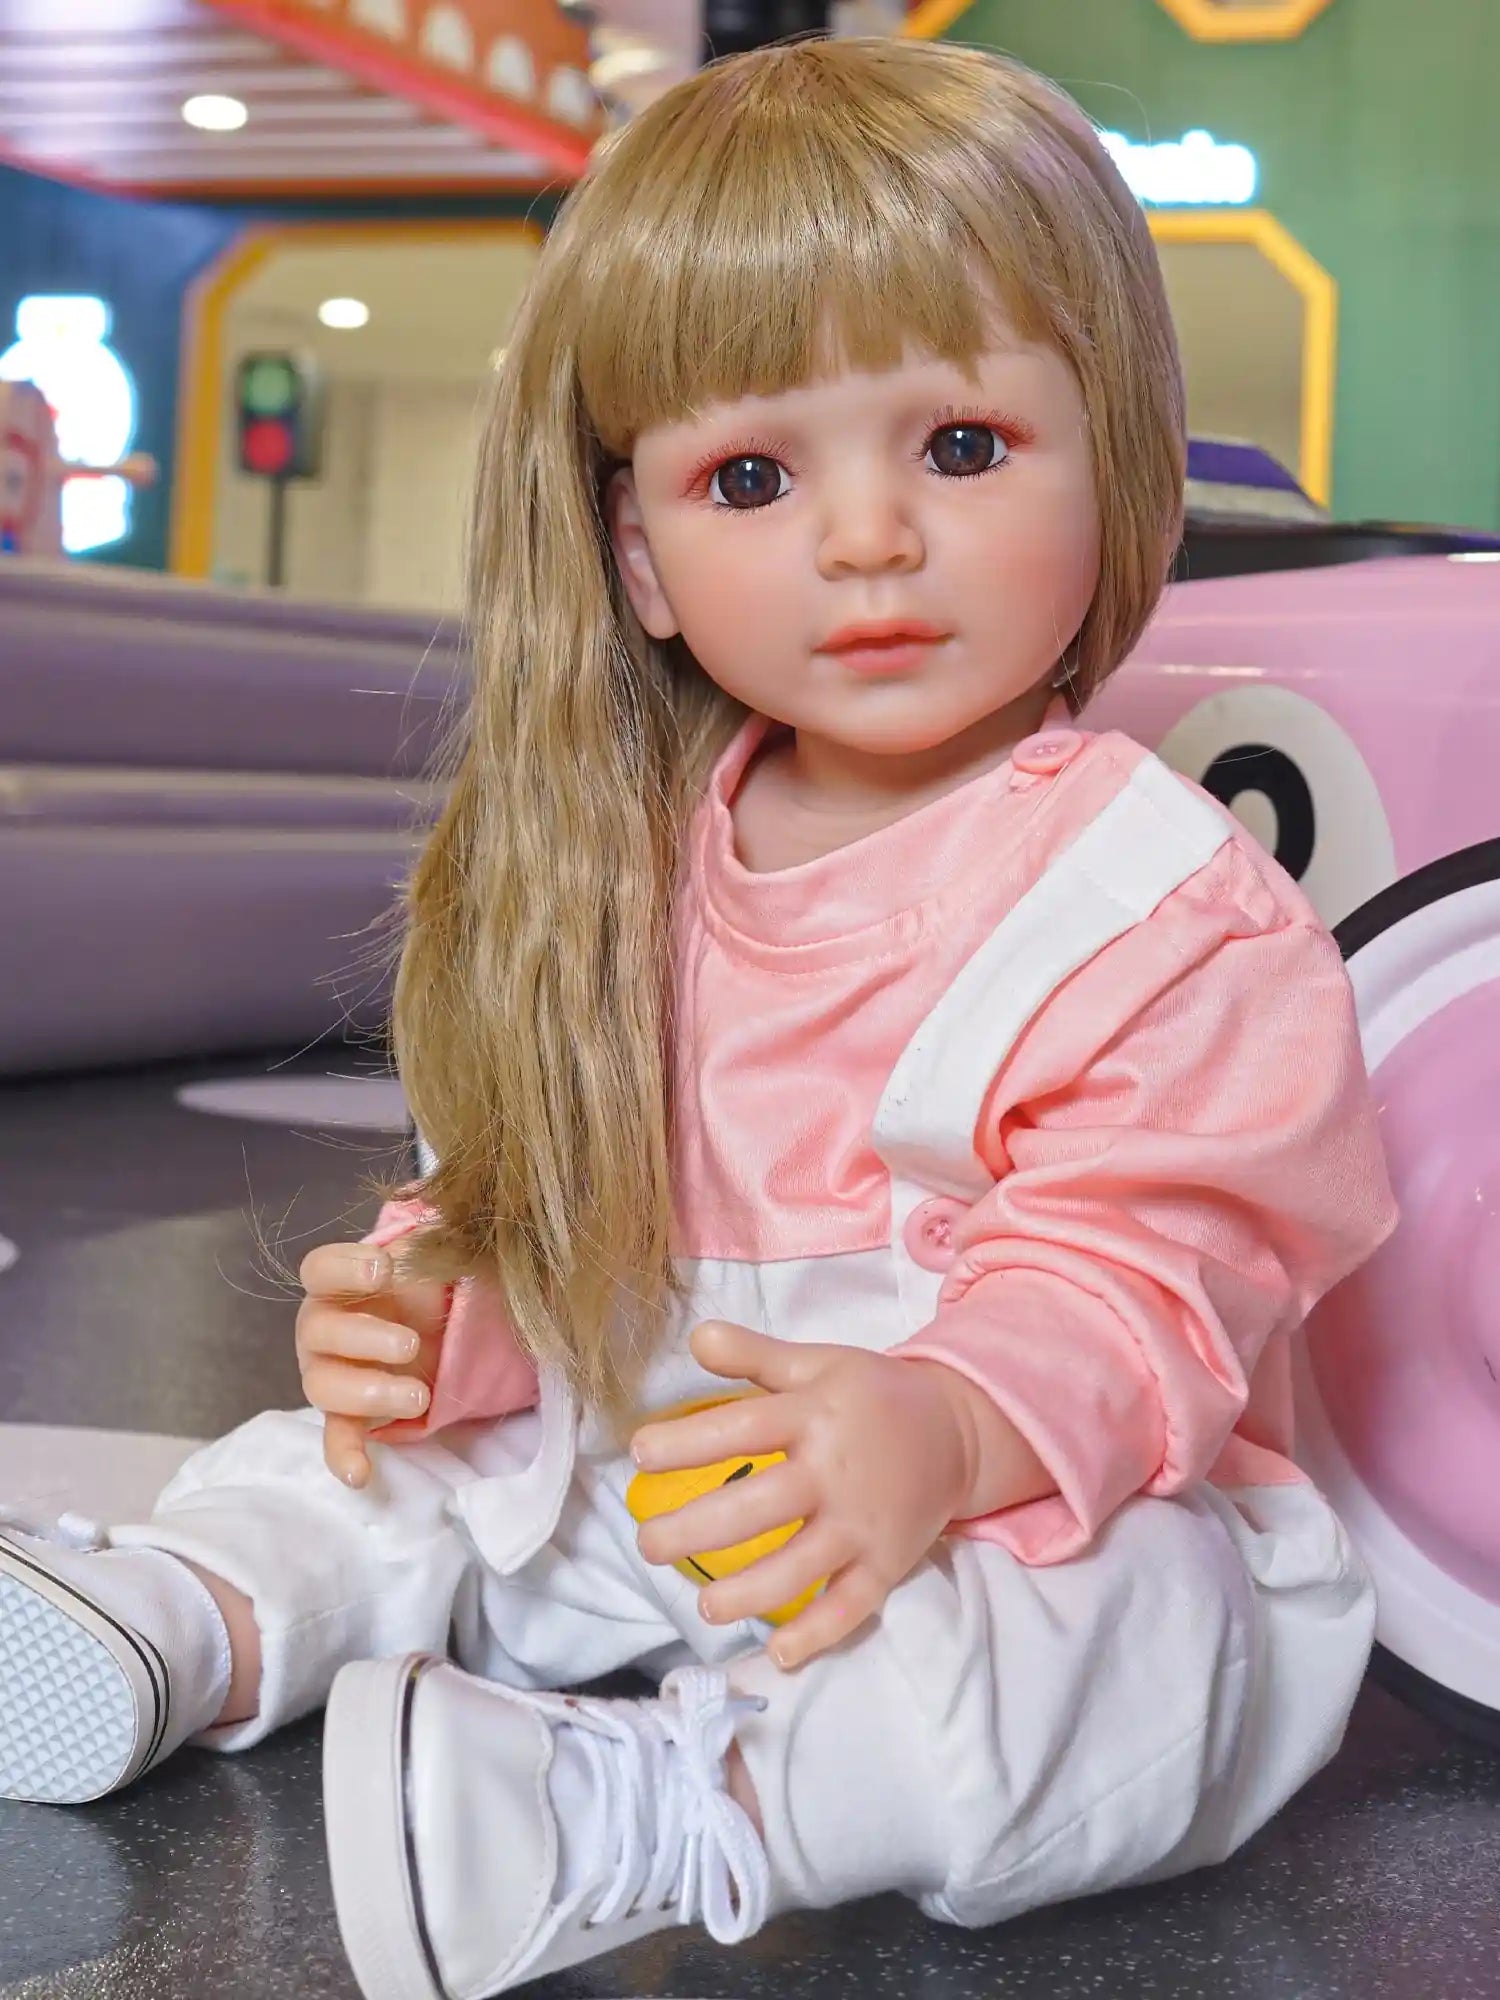 Doll with a lifelike presence, gently clutching a toy, dressed in a comfortable outfit, ready for fun and games.